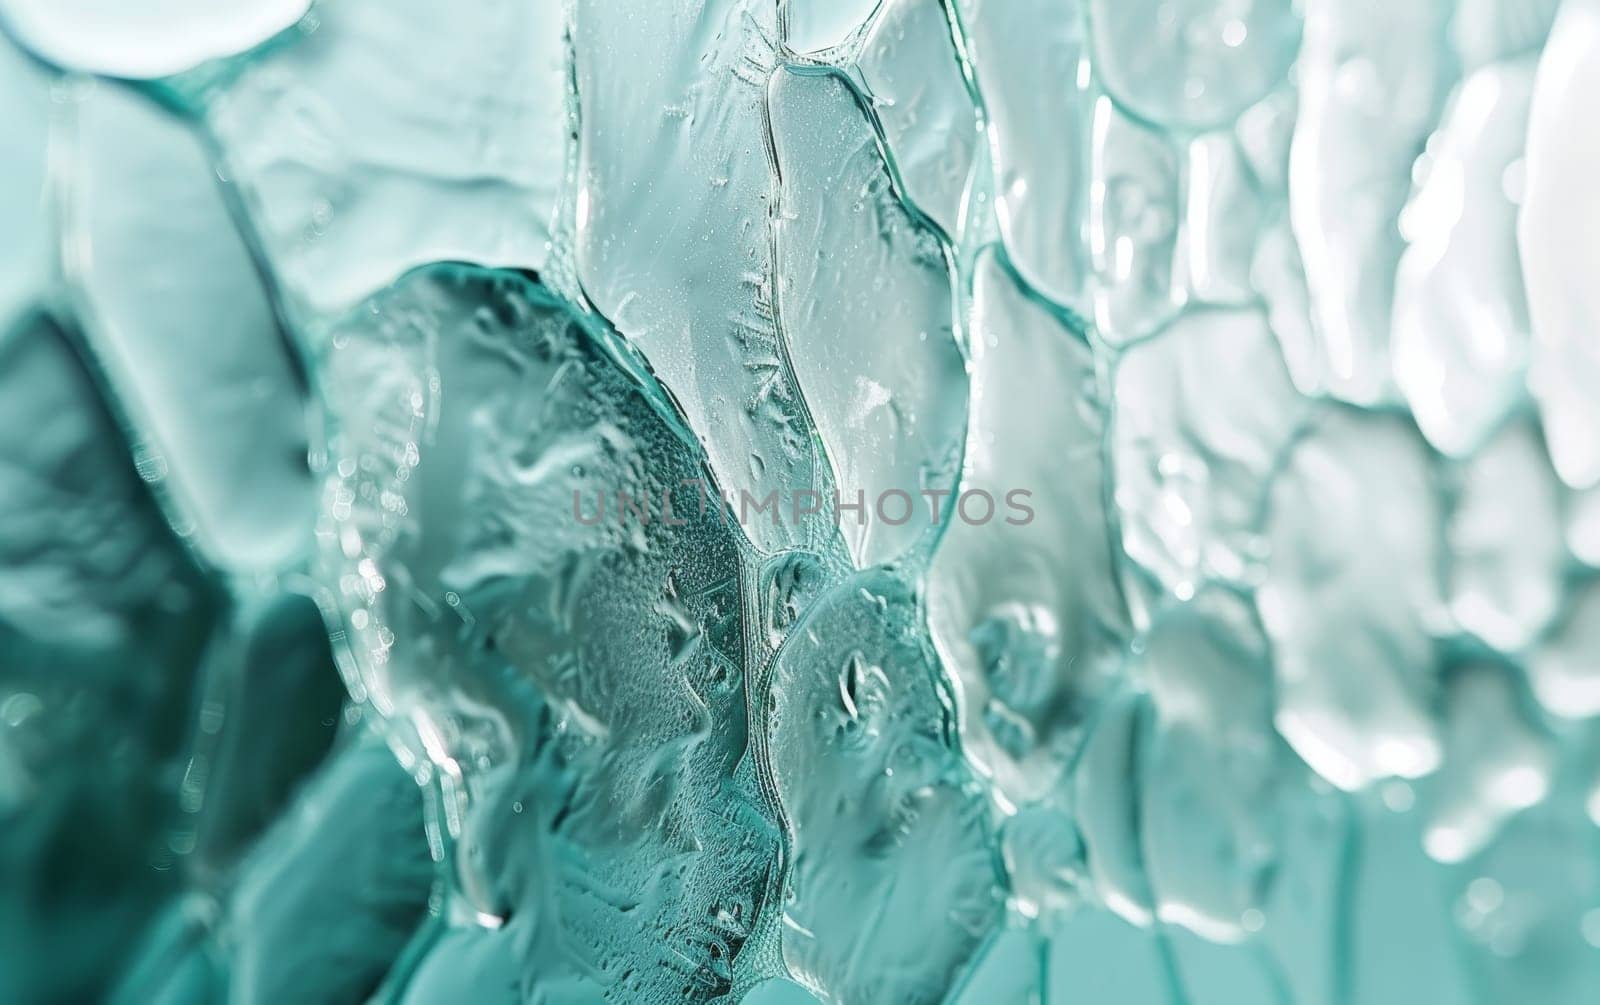 Macro shot of a glass pane with a frozen texture effect and a blend of turquoise and white hues.. by sfinks